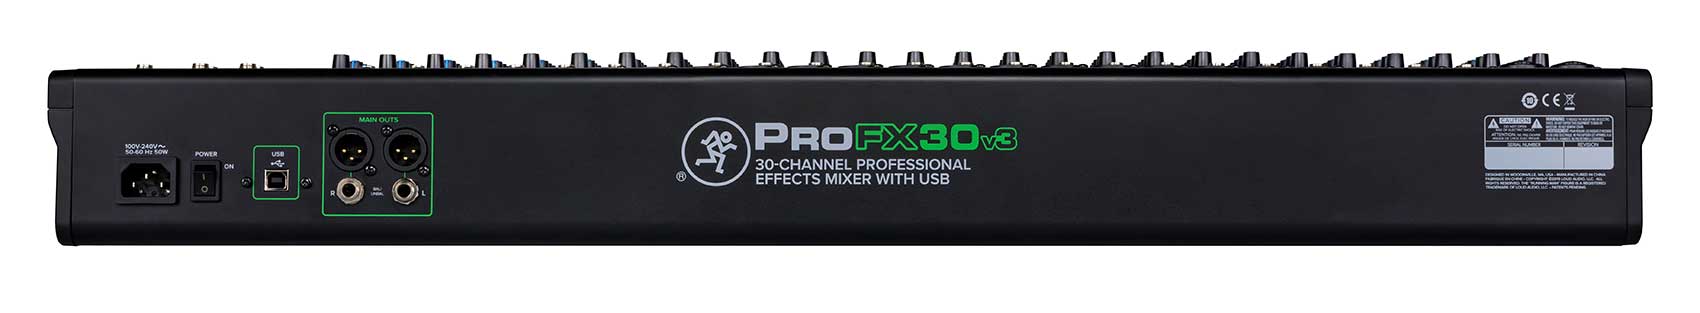 Mackie ProFX30v3 30-Channel 4-Bus Effects Mixer ProFX30 v3+50 Ft XLR Snake Cable - image 5 of 13